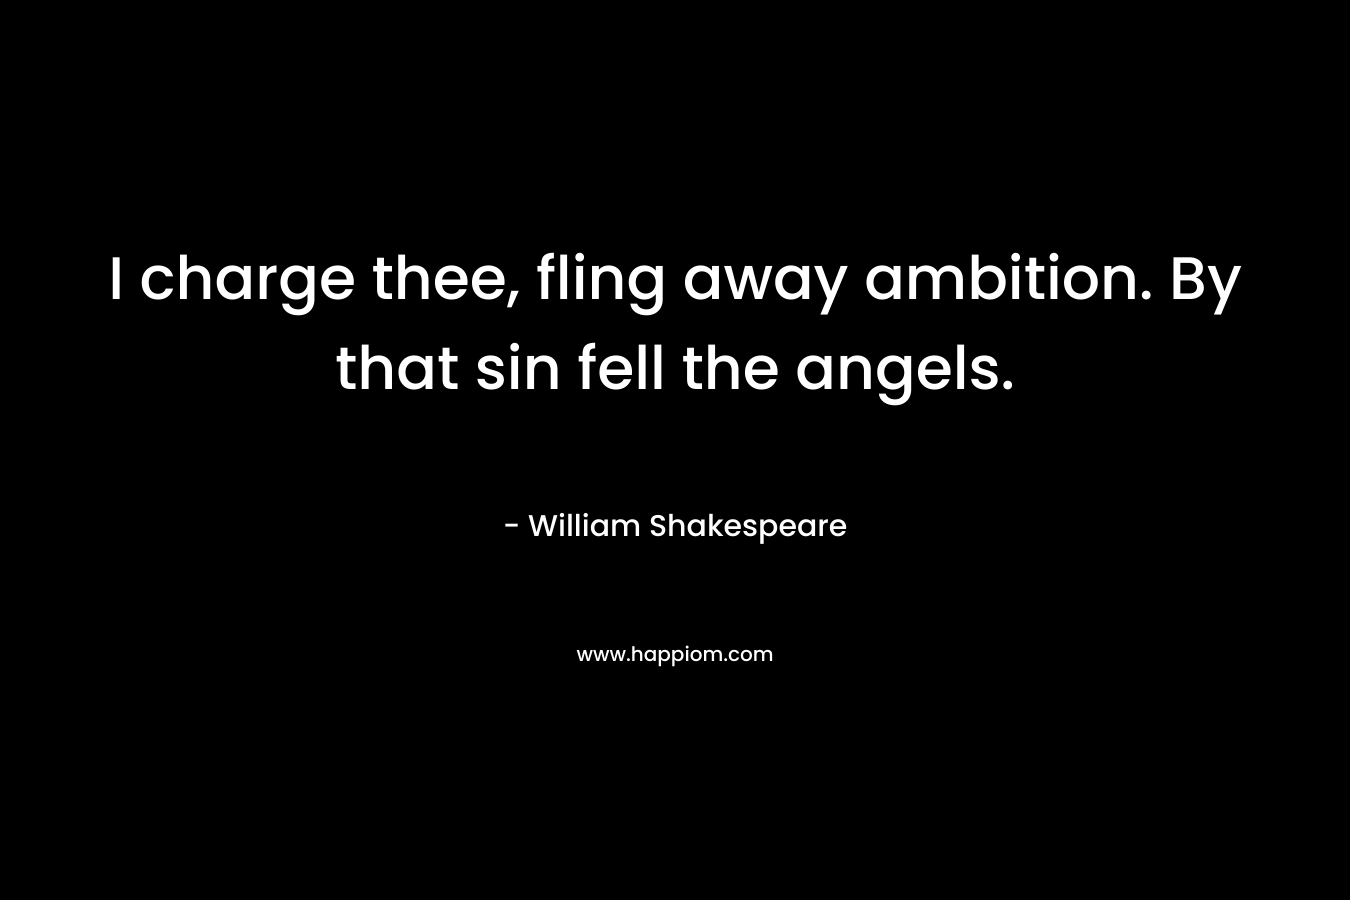 I charge thee, fling away ambition. By that sin fell the angels. – William Shakespeare